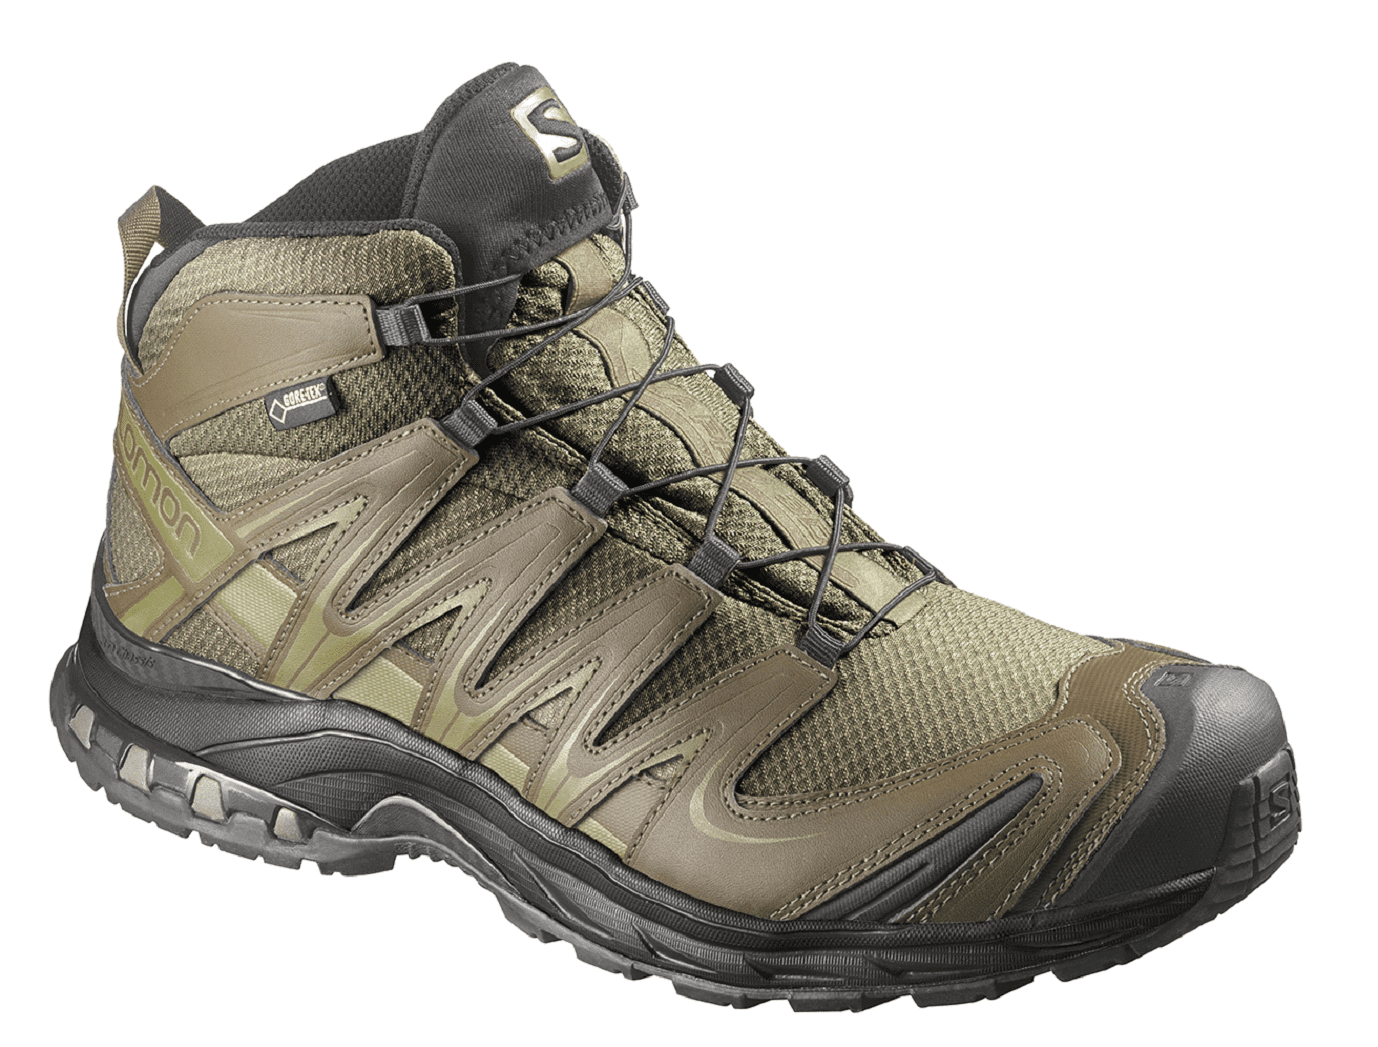 SSD Exclusive - Salomon FORCES Footwear Lineup - Soldier Systems Daily